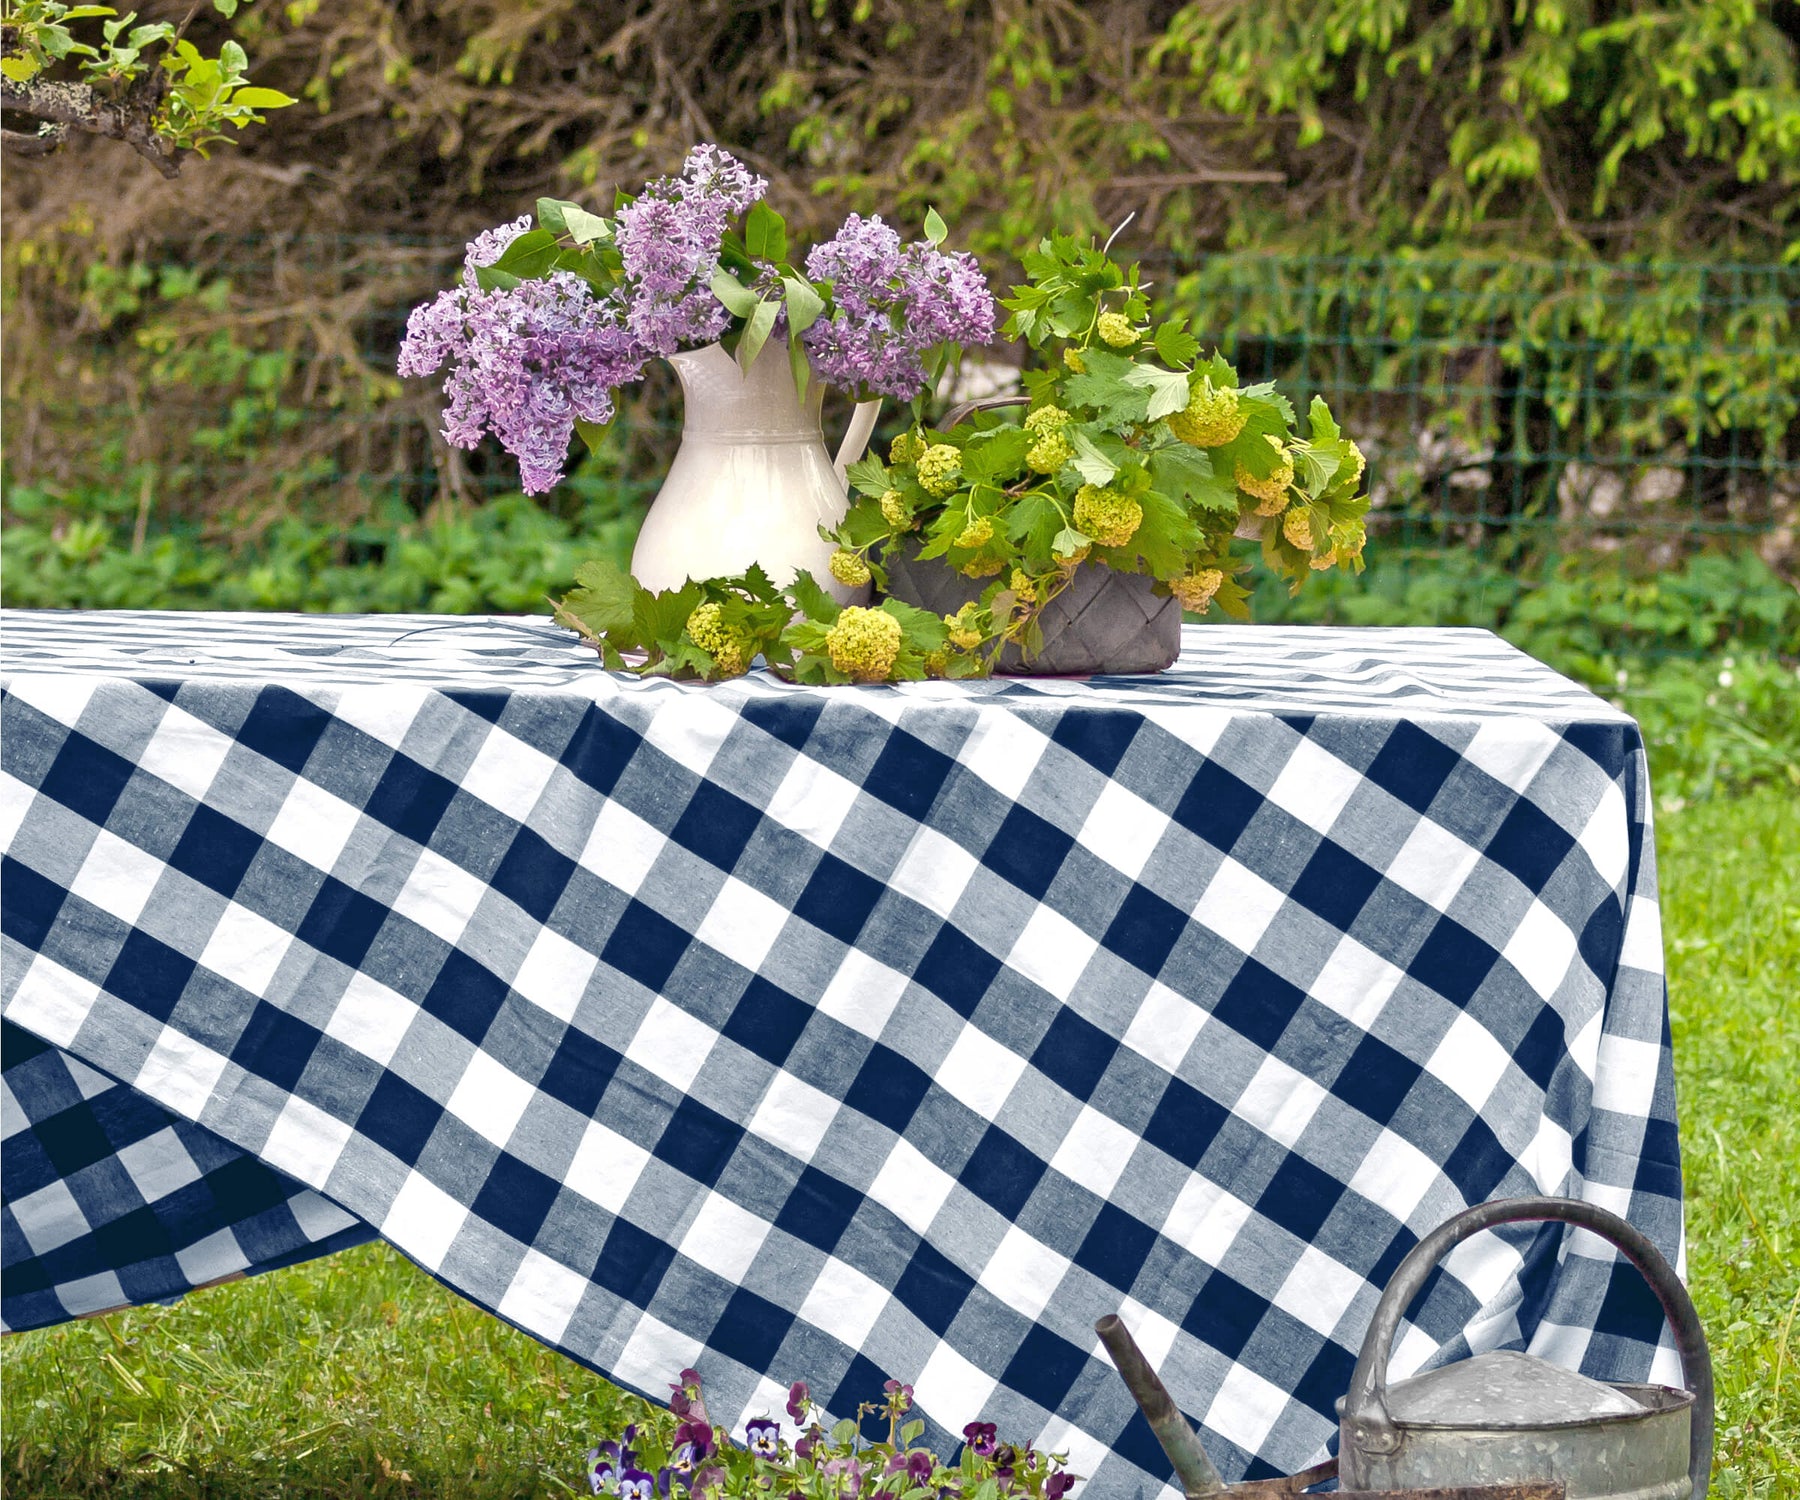 A blue and white tablecloth is often associated with nautical themes, making it ideal for beachside parties or summer gatherings.